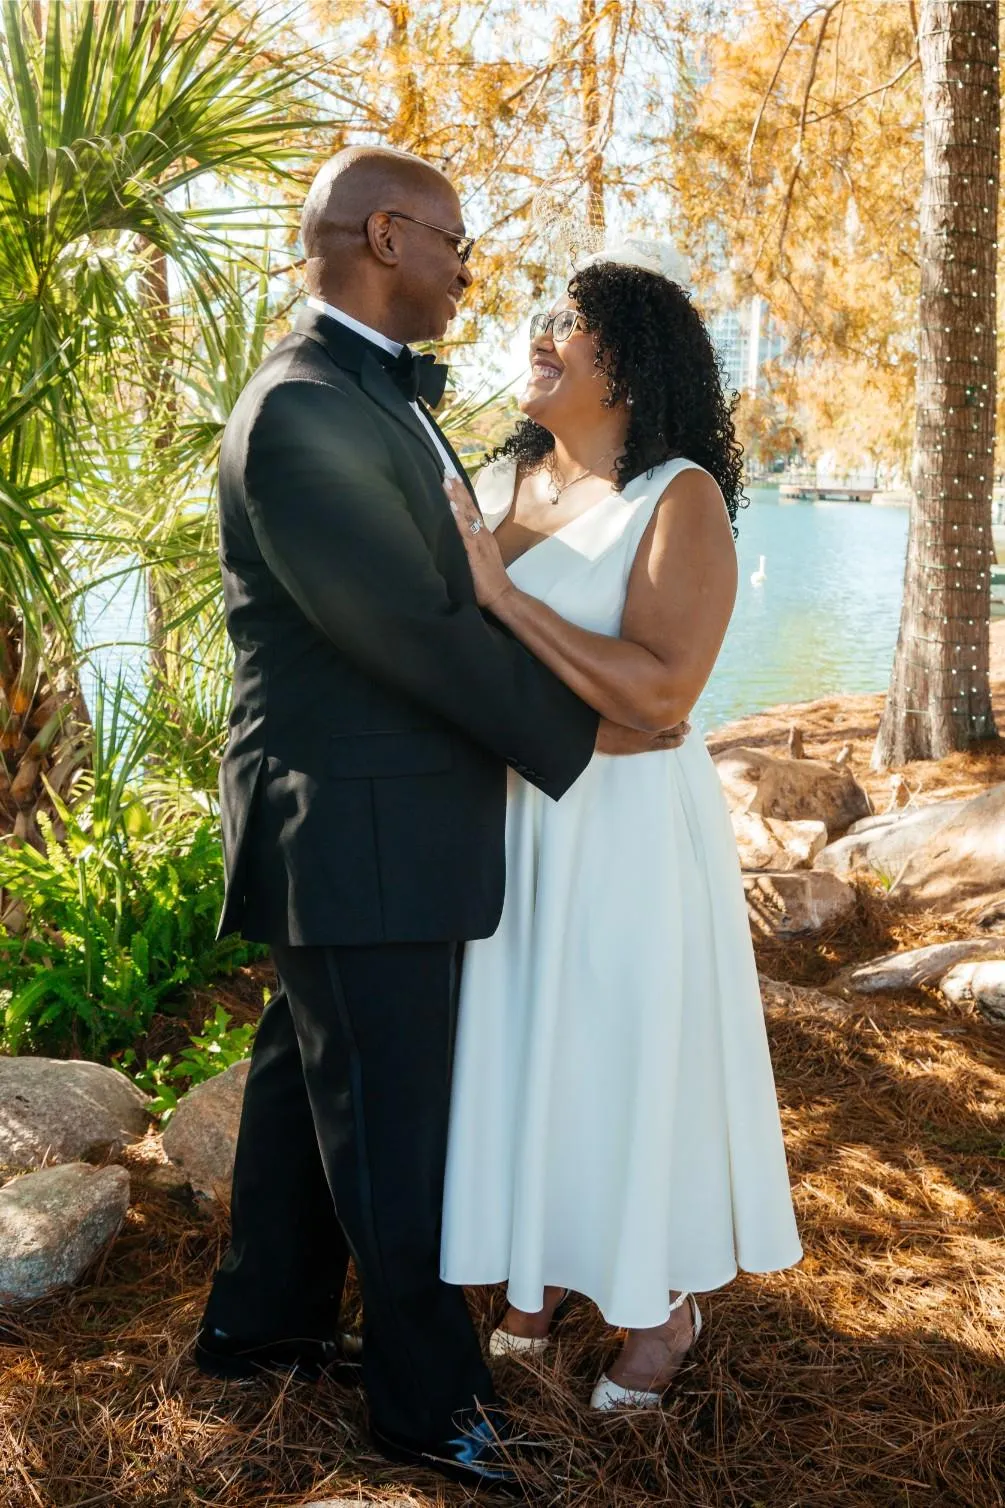 Married couple at Lake Eola Park Posing for Wedding Photos